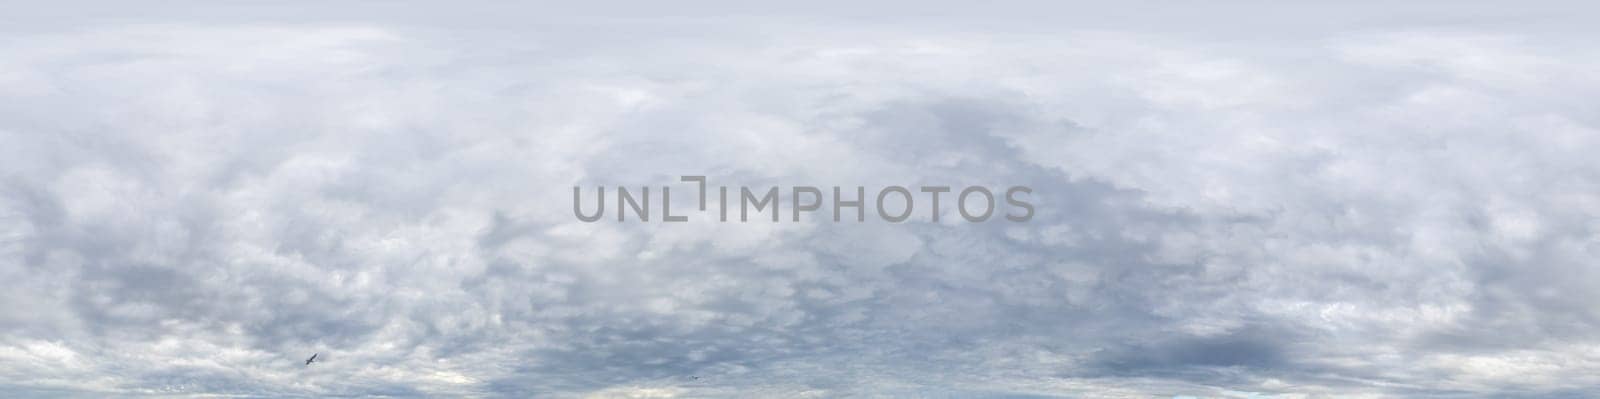 Dramatic overcast sky panorama with dark gloomy Cumulonimbus clouds. HDR 360 seamless spherical panorama. Sky dome in 3D, sky replacement for aerial drone panoramas. Weather and climate change